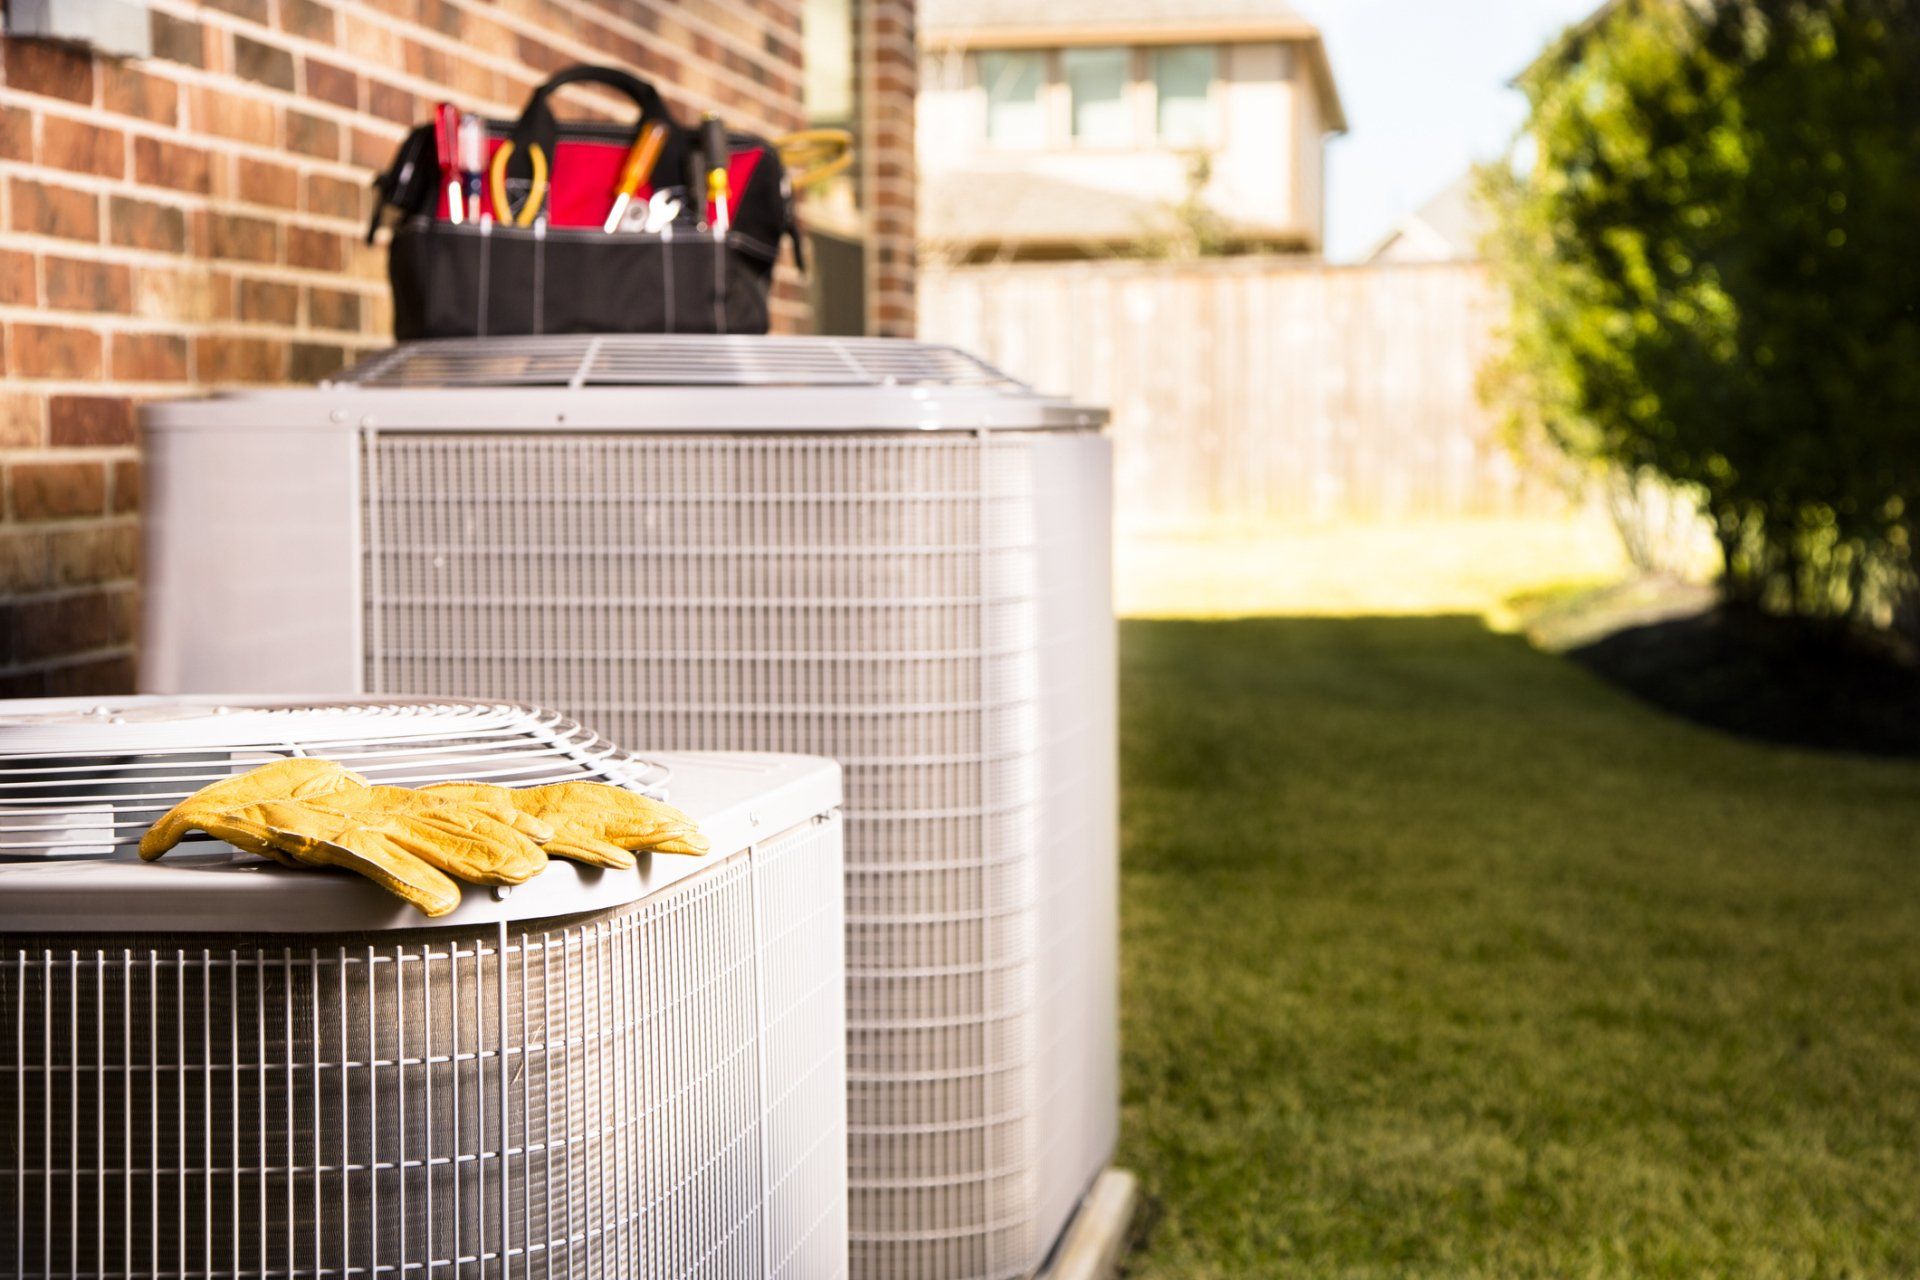 Work Tools On Air Conditioners - Hendersonville, NC - Tucker Heating & Air